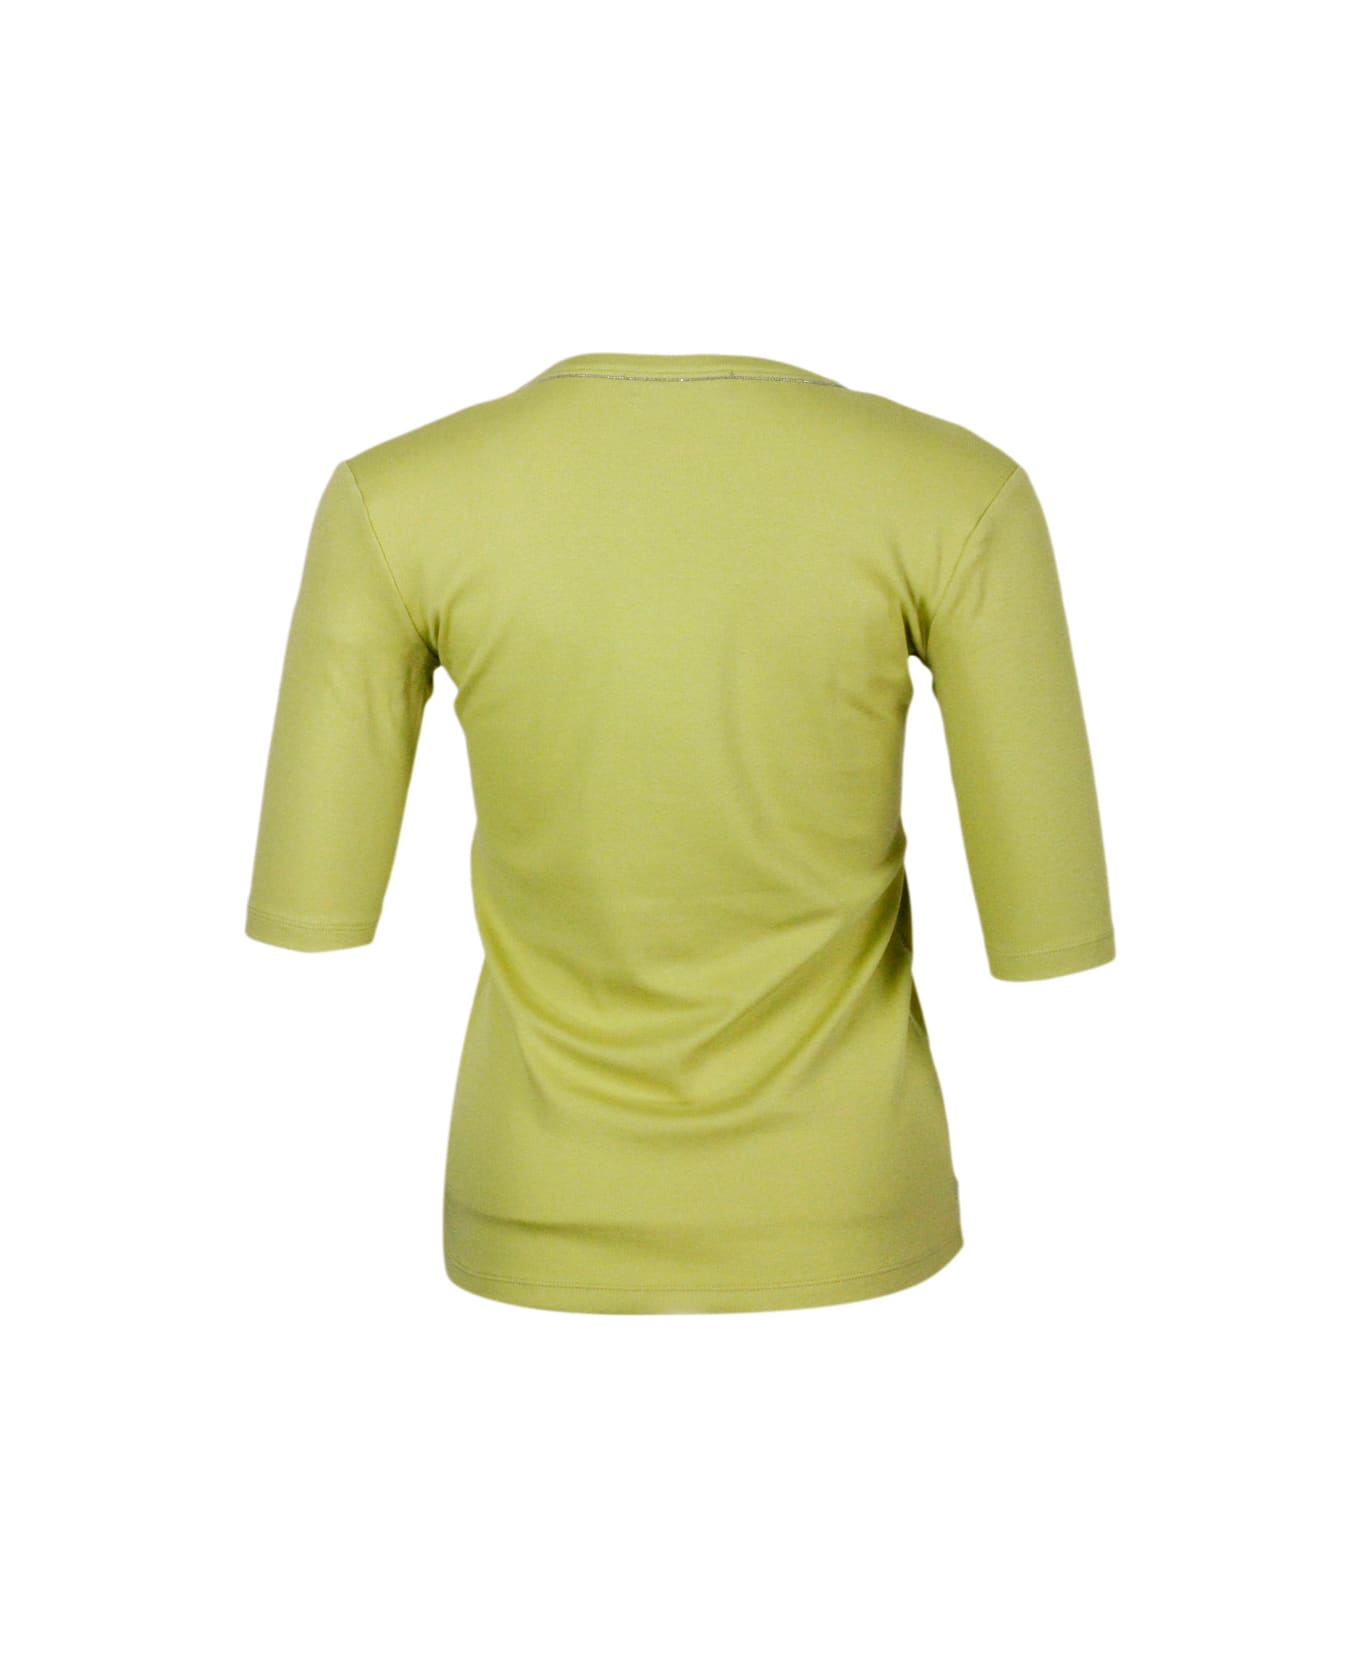 Fabiana Filippi Ribbed Cotton T-shirt With U-neck, Elbow-length Sleeves Embellished With Rows Of Monili On The Neck And Sides - Lime